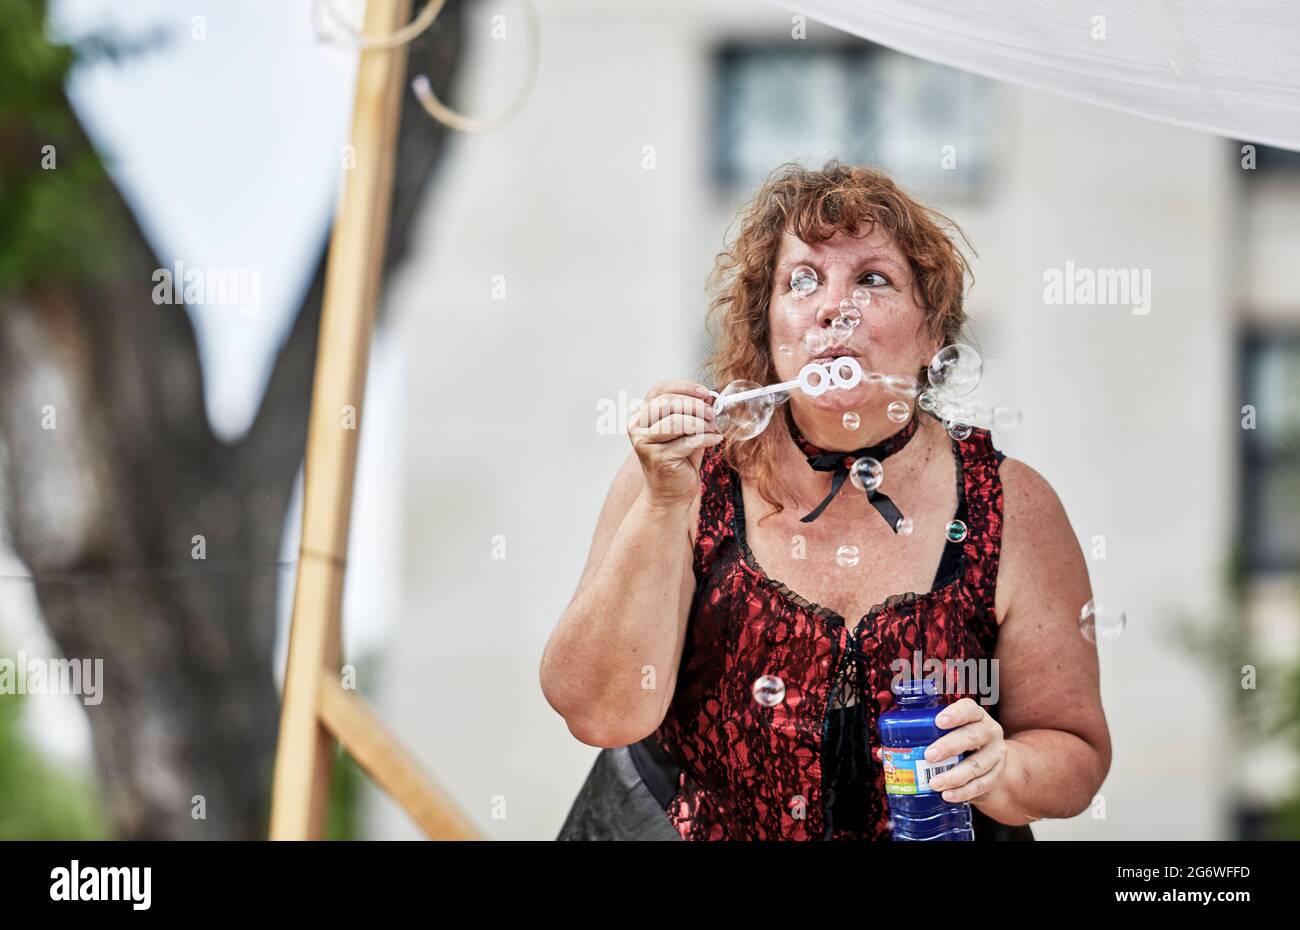 Prescott, Arizona, USA - July 3, 2021: Woman blowing bubbles while riding on a float in the 4th of July parade Stock Photo